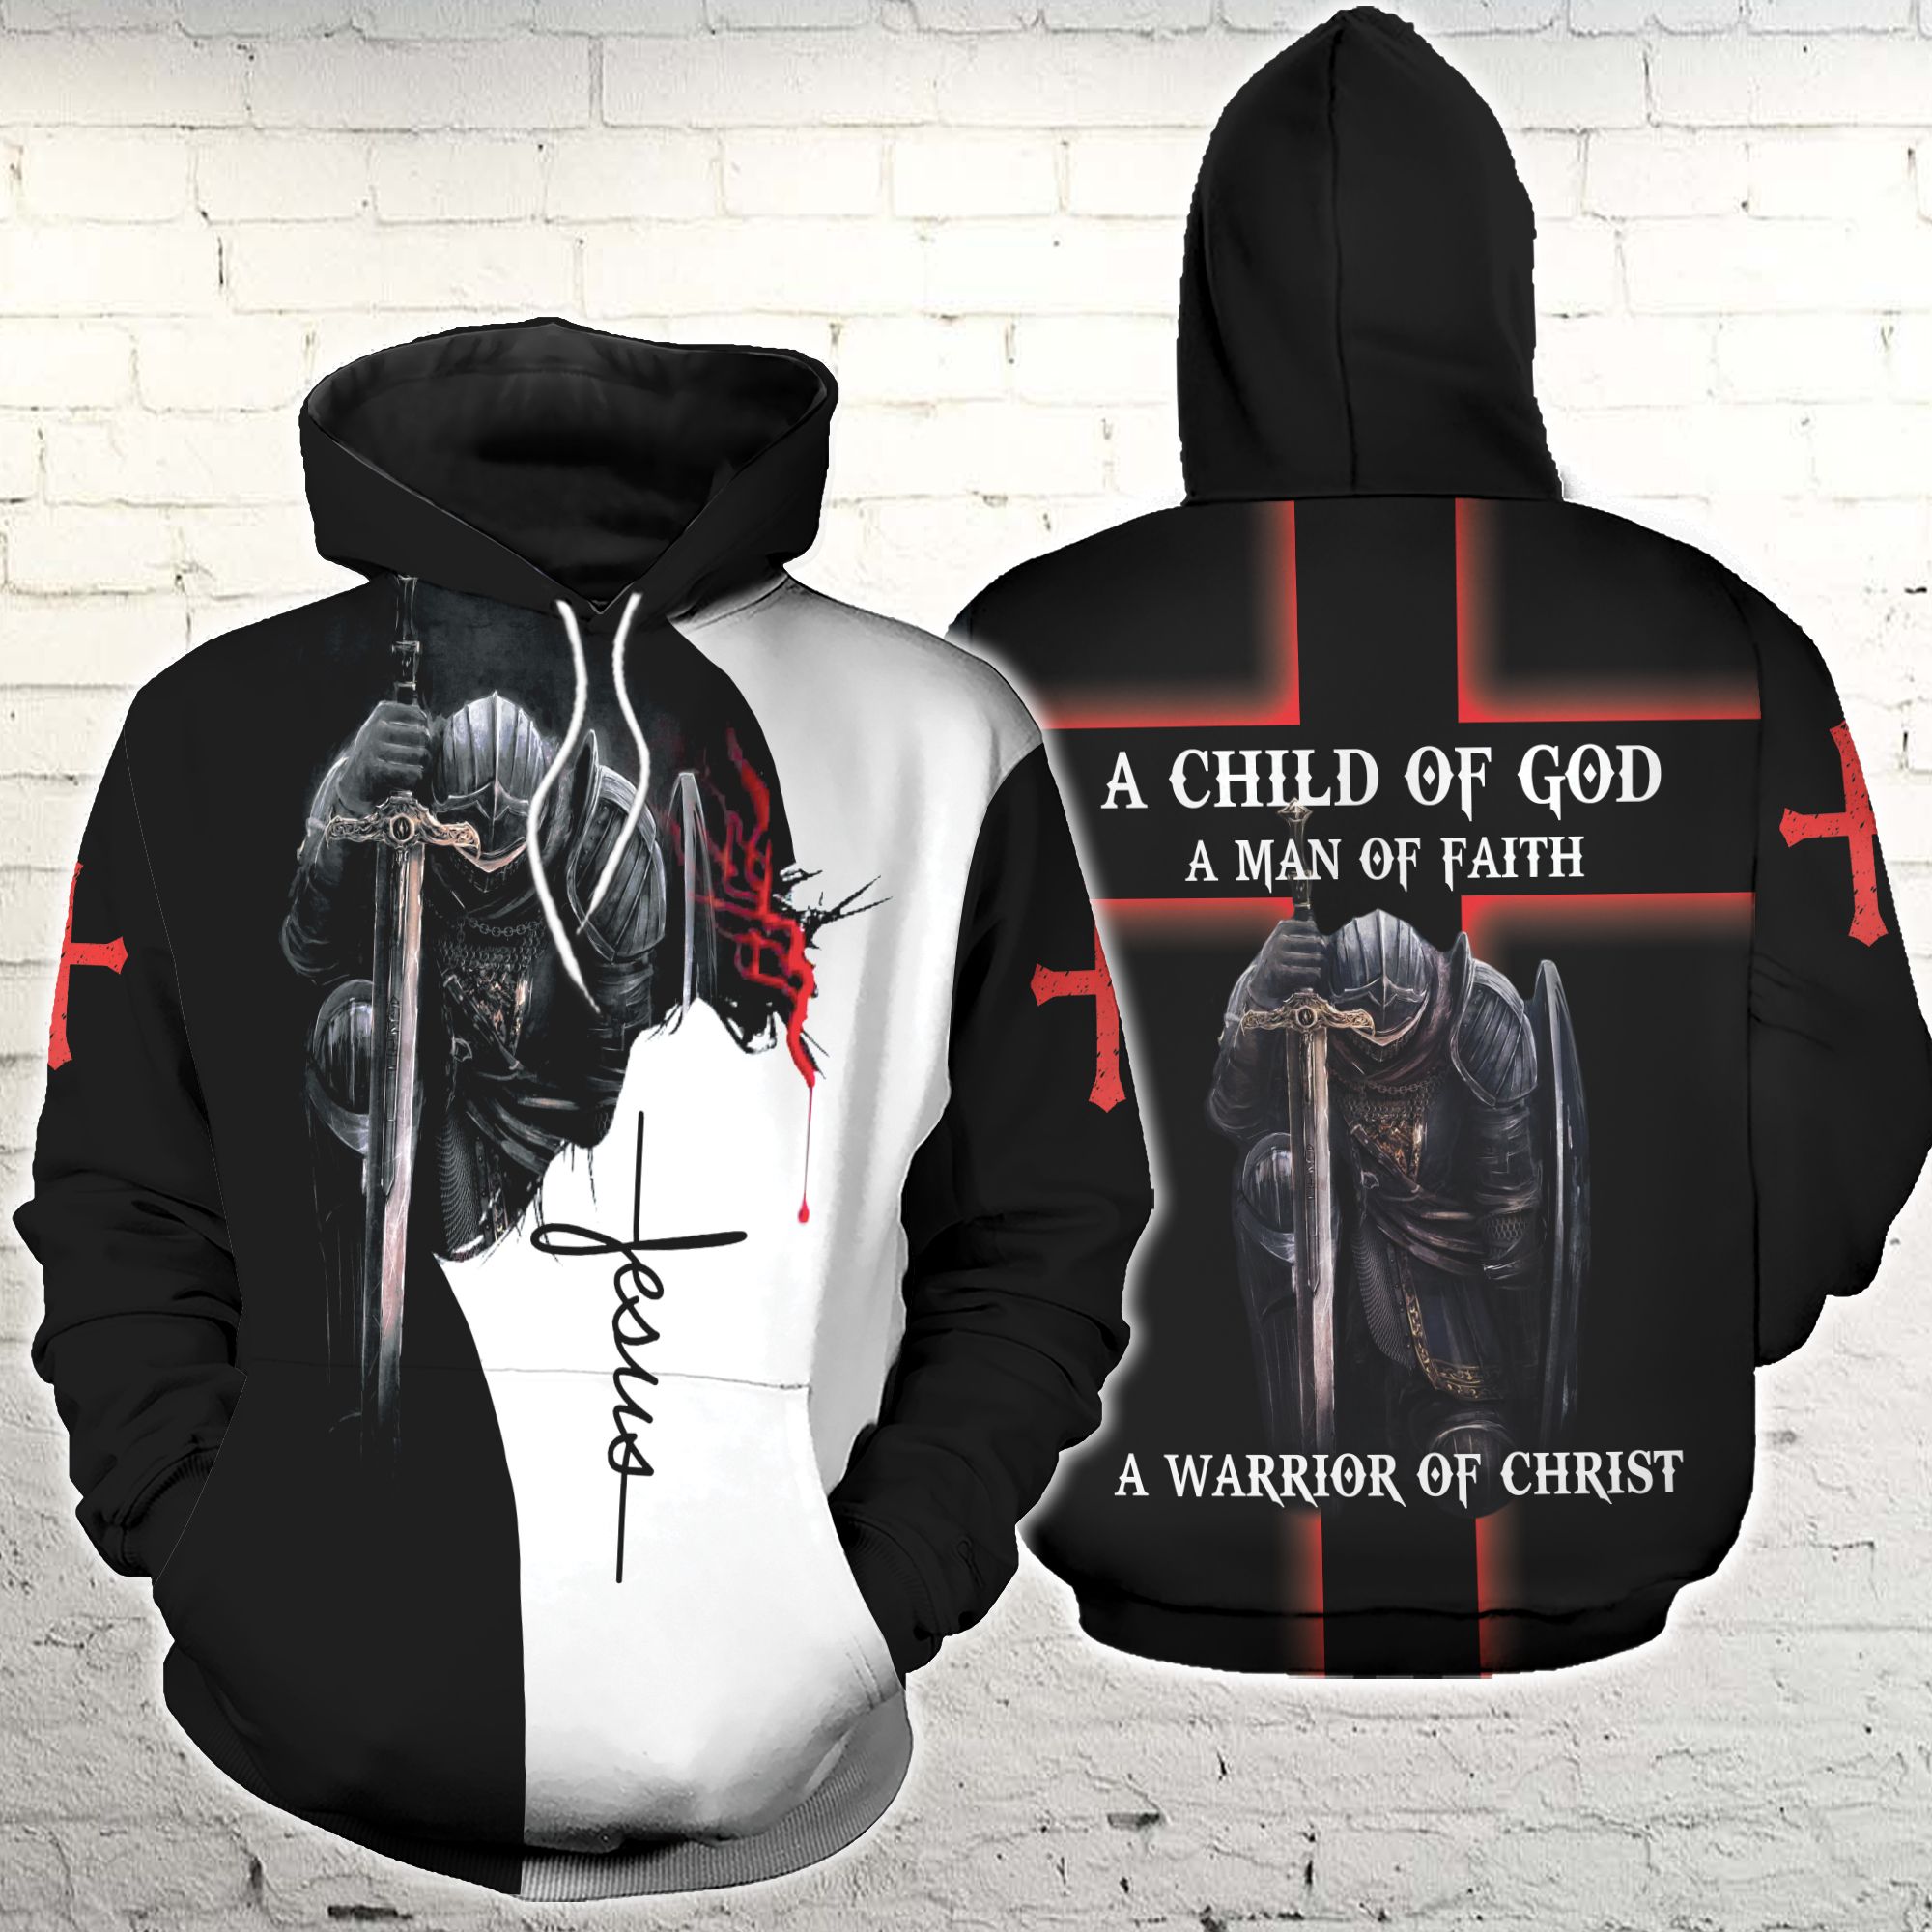 A Child Of God A Man Of Faith A Warrior Of Christ 3D Hoodie PAN3HD0003